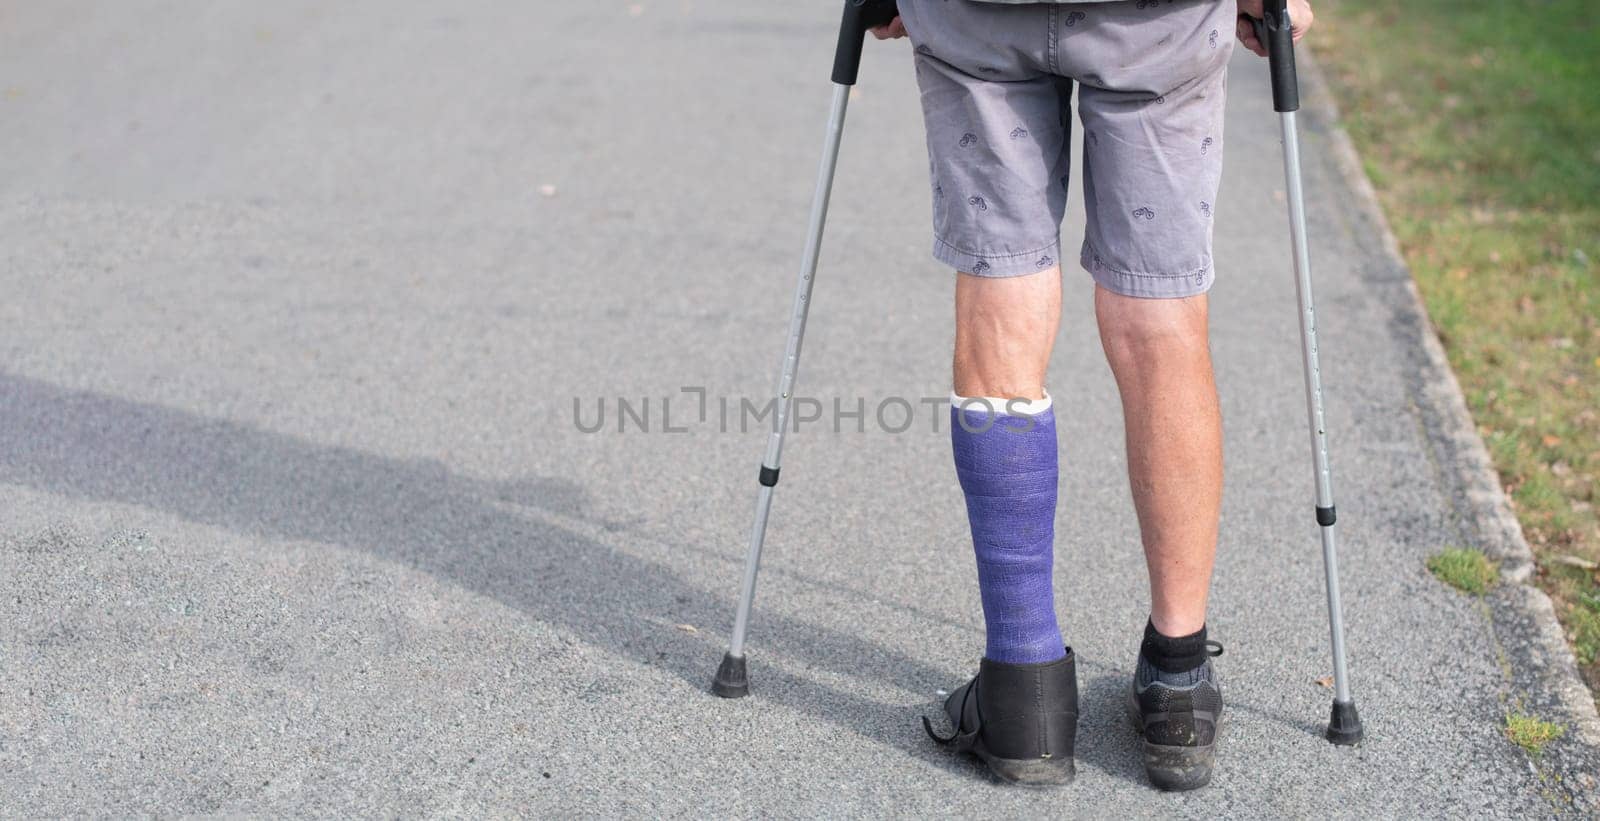 man with a broken leg walks down the street, his left leg is in a cast, the man moves with the help of crutches by KaterinaDalemans